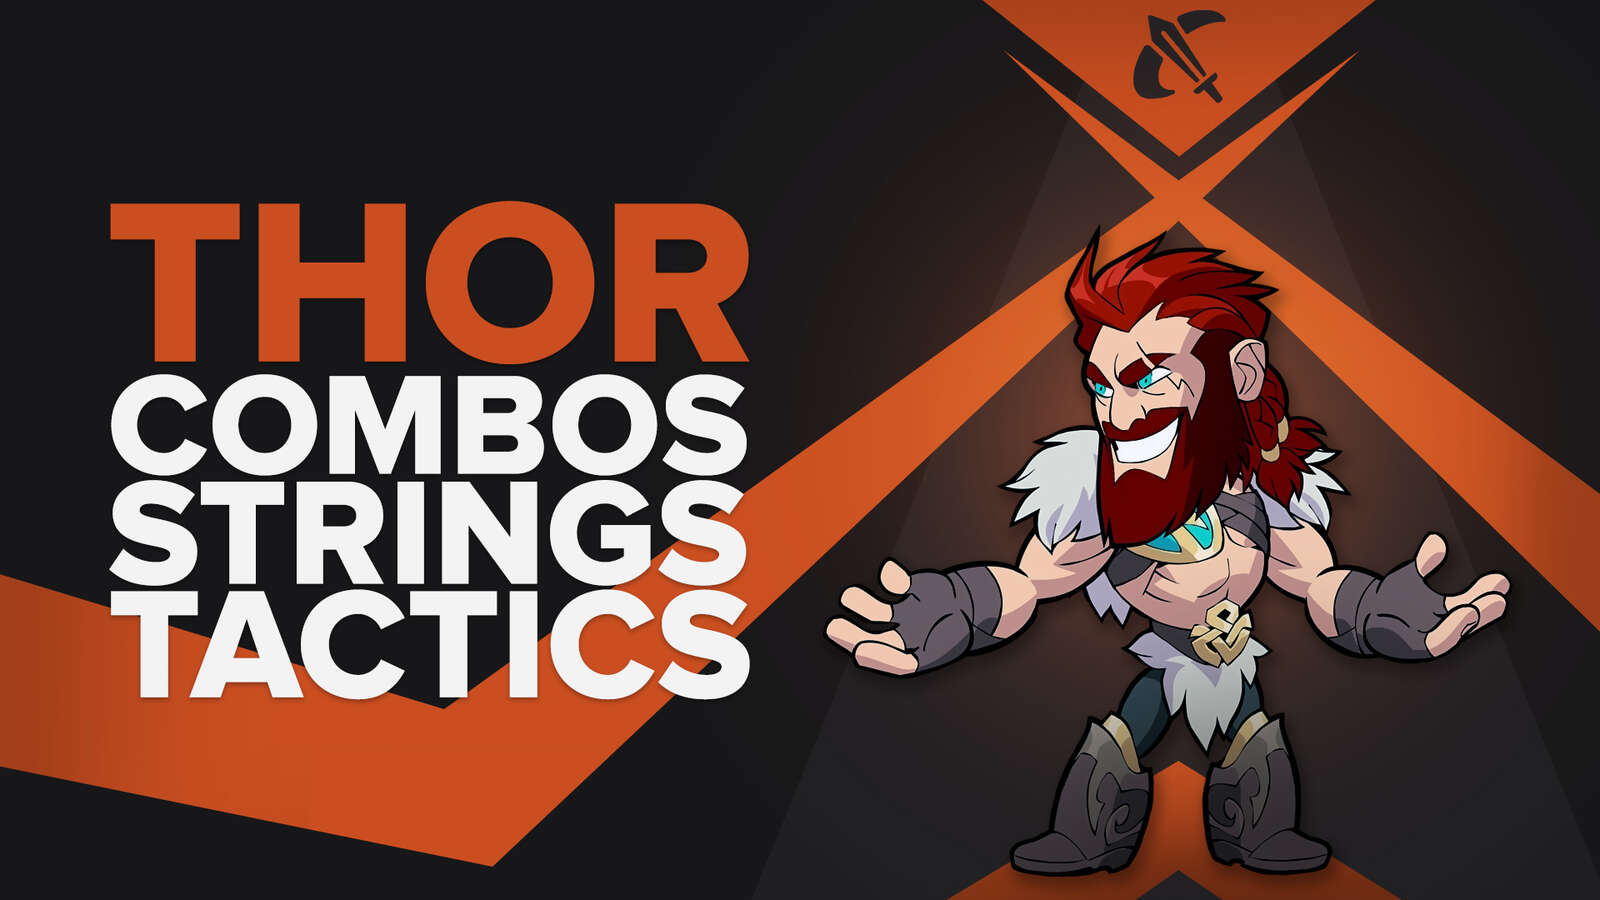 Best Thor combos, strings, and combat tactics in Brawlhalla